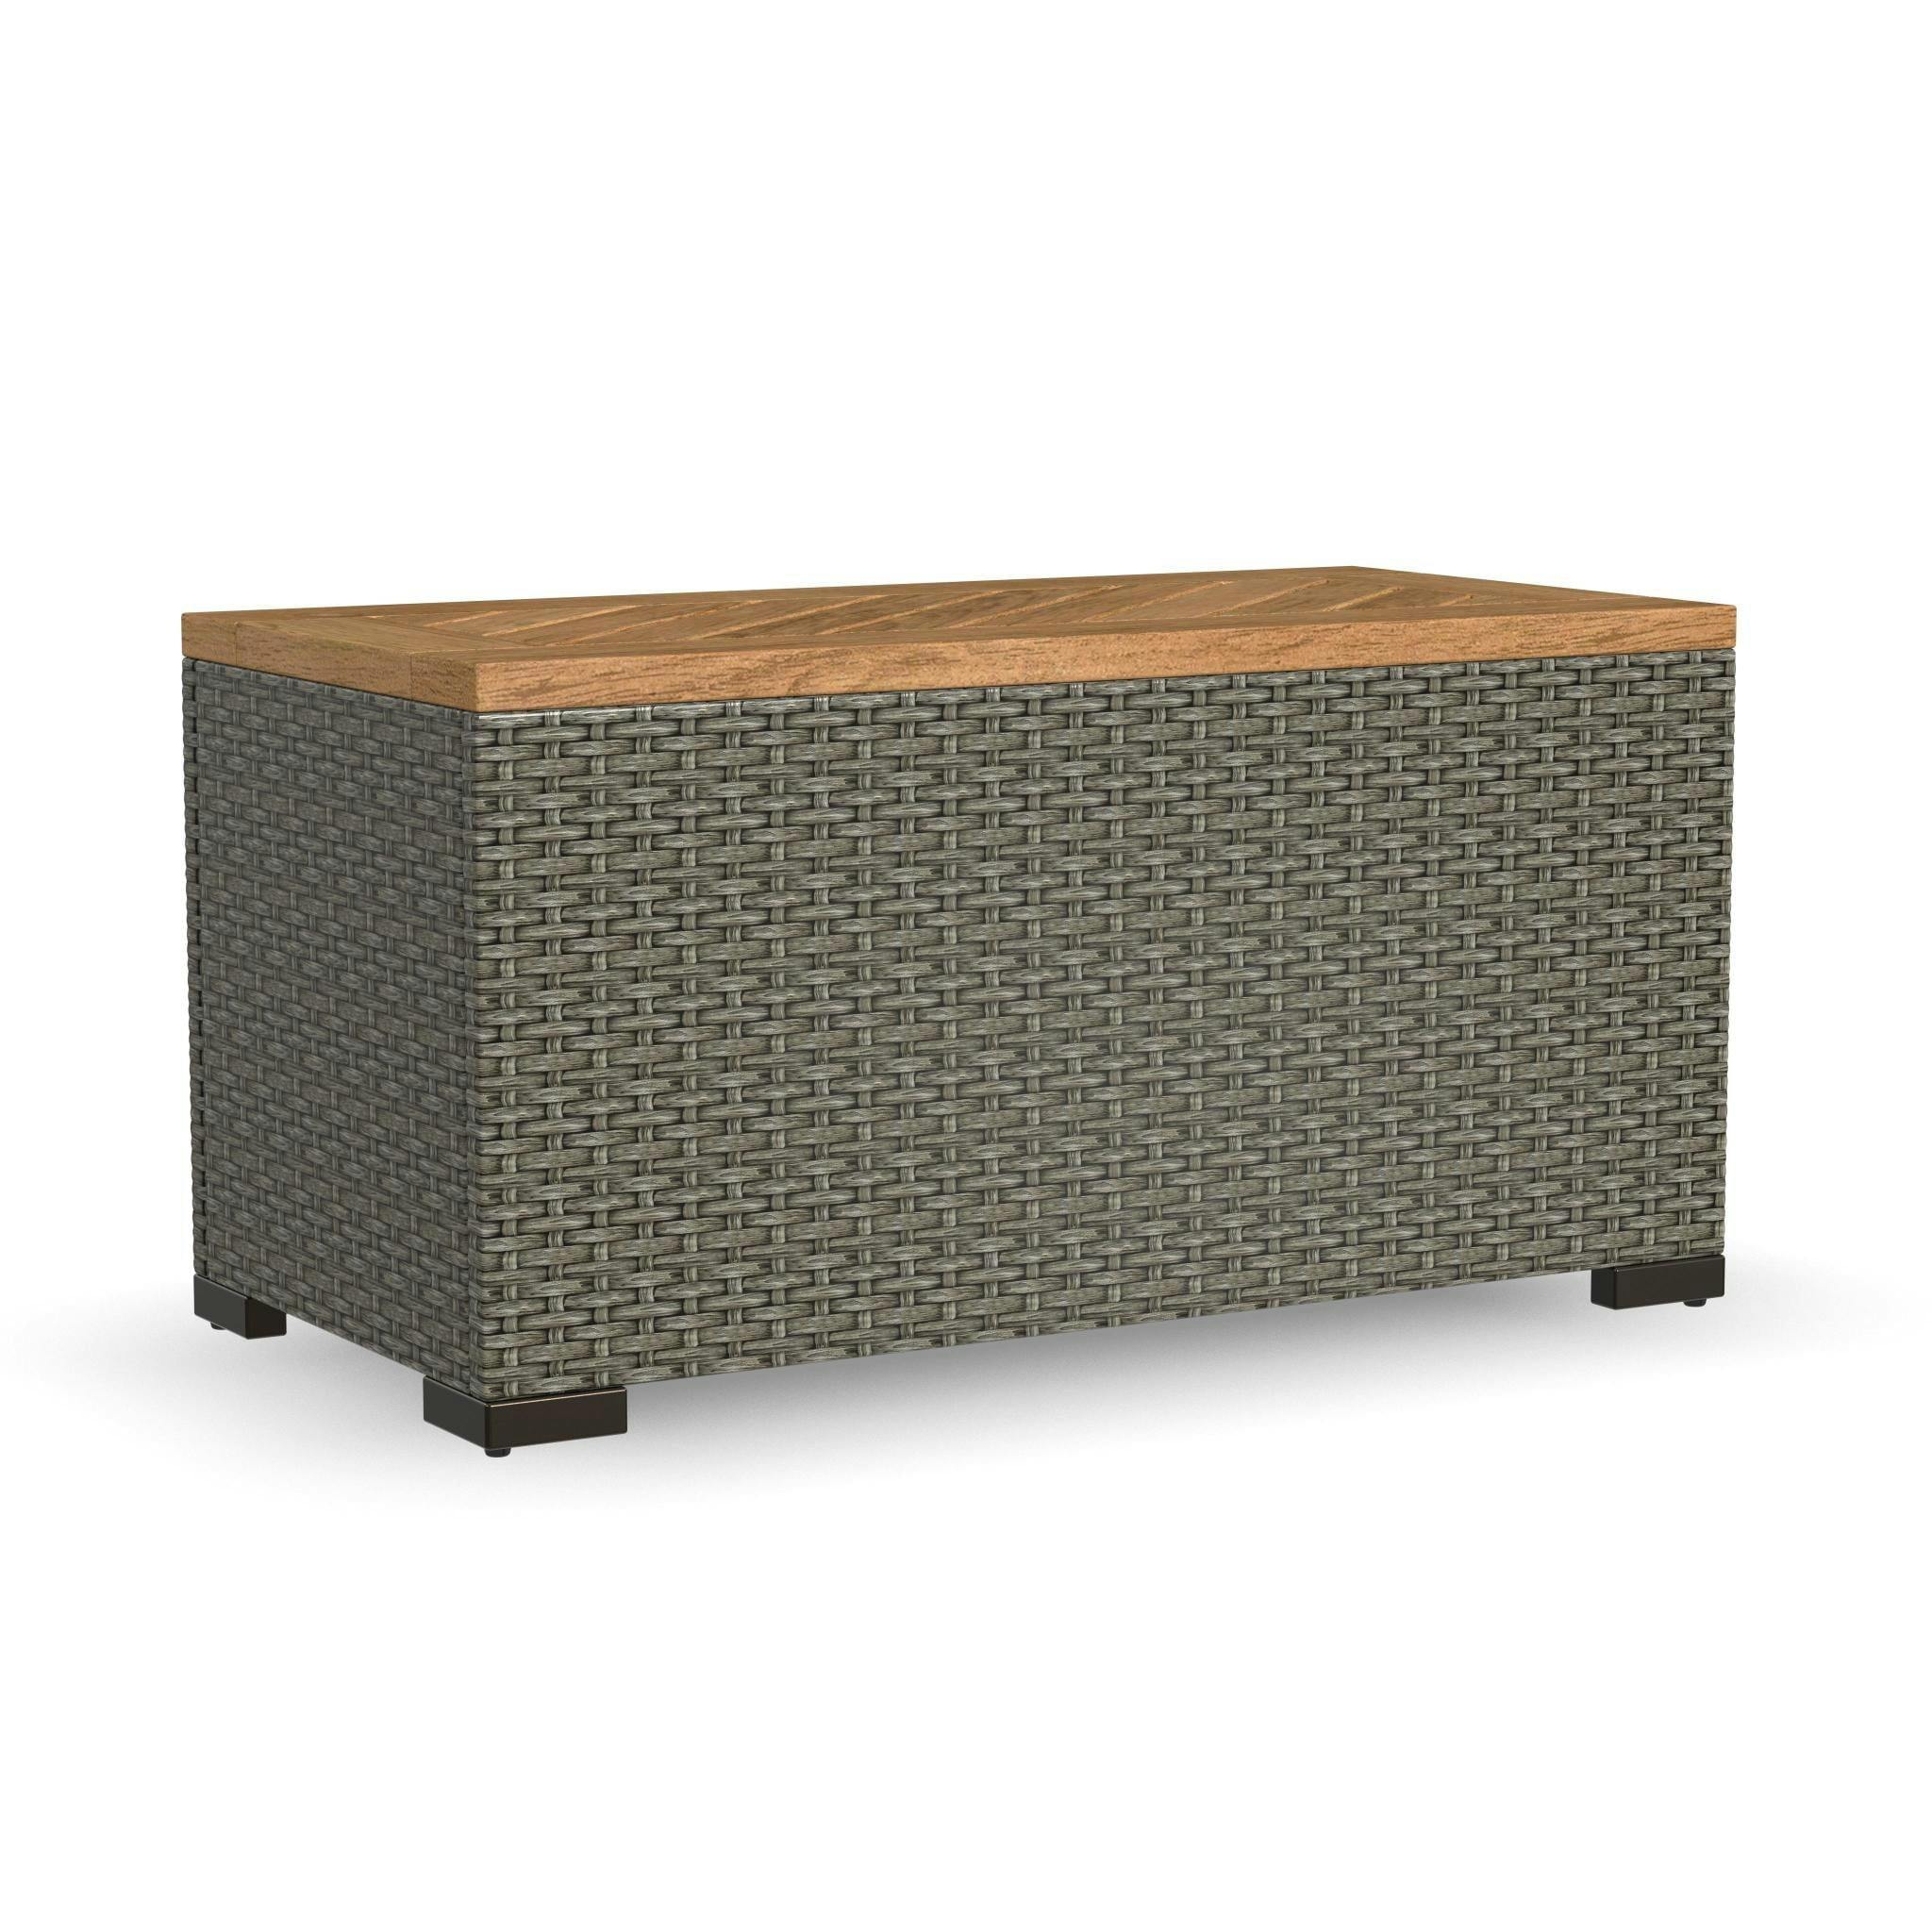 Boca Raton Handcrafted Rattan Outdoor Storage Table in Brown